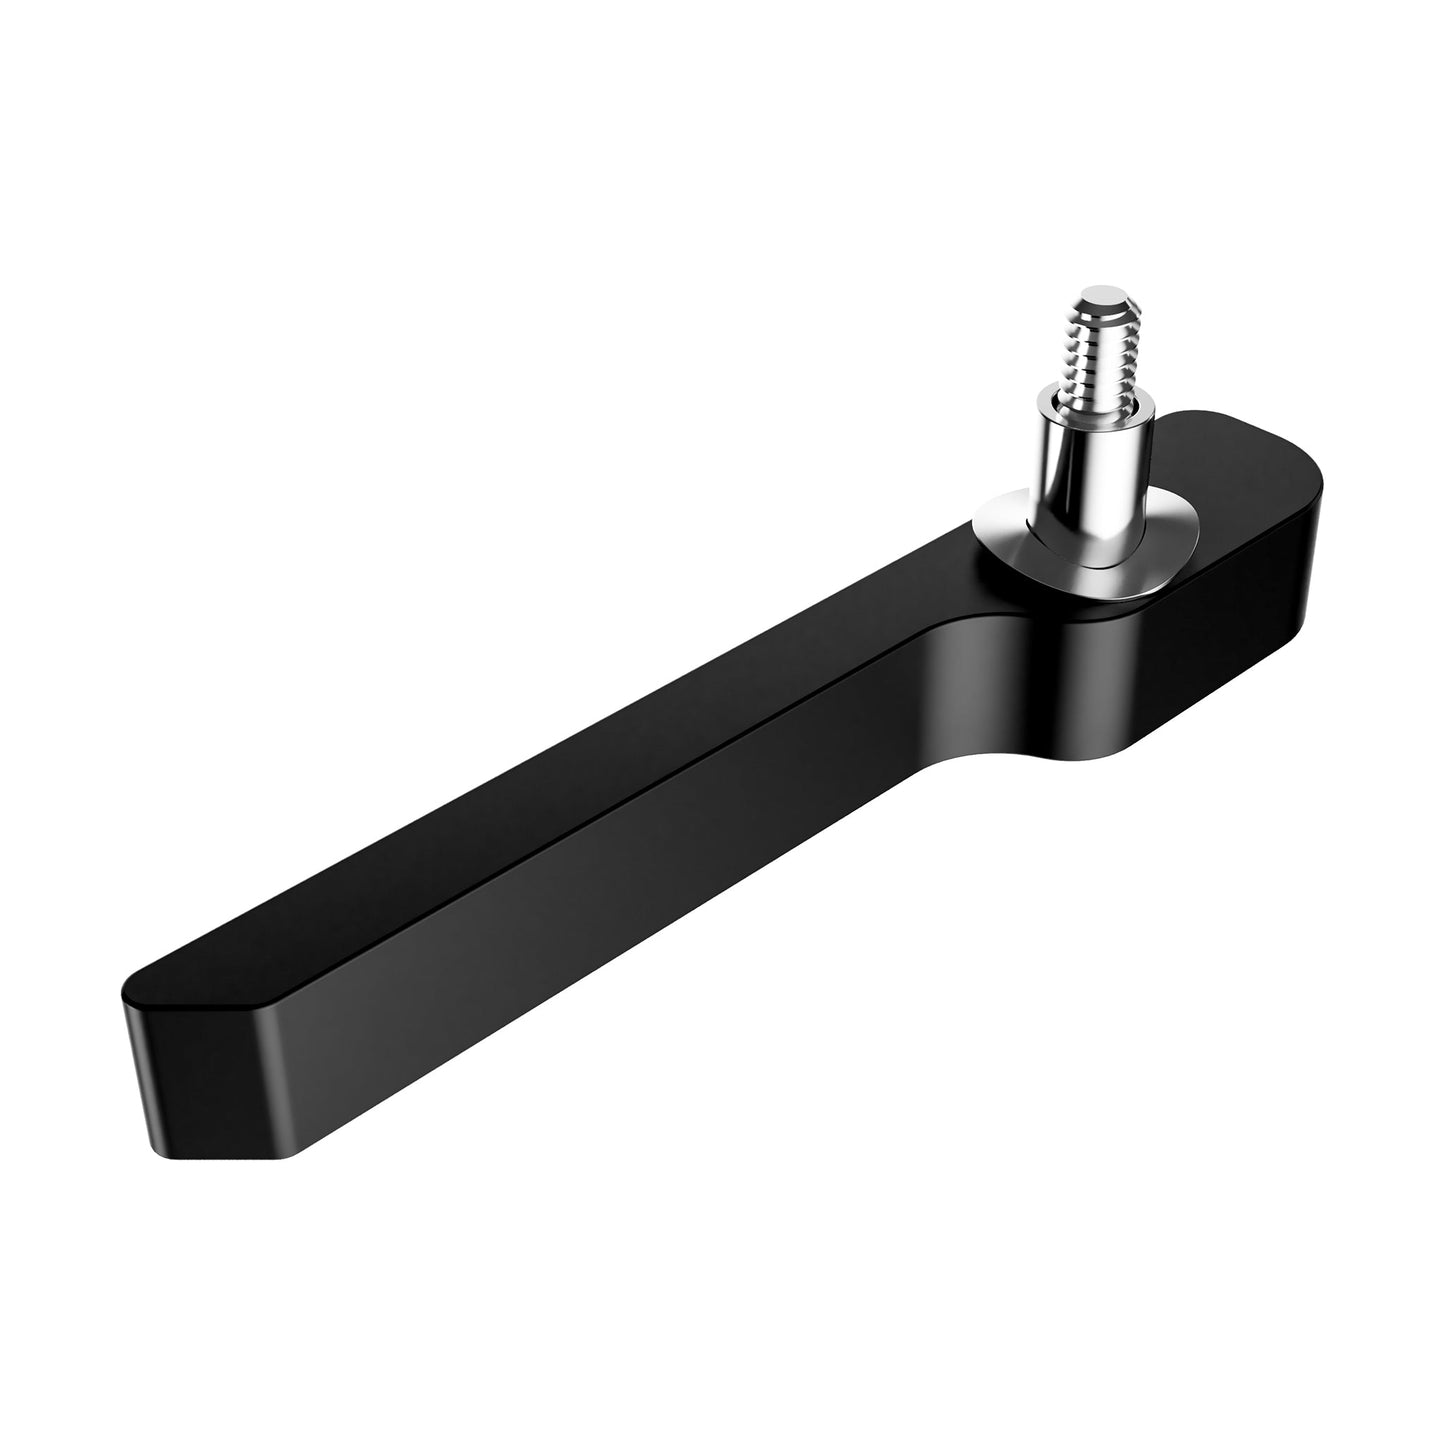 3U Universal Injector/Ejector (#14121), metal handle hardware component for PCB removal, Black Anodized Finish